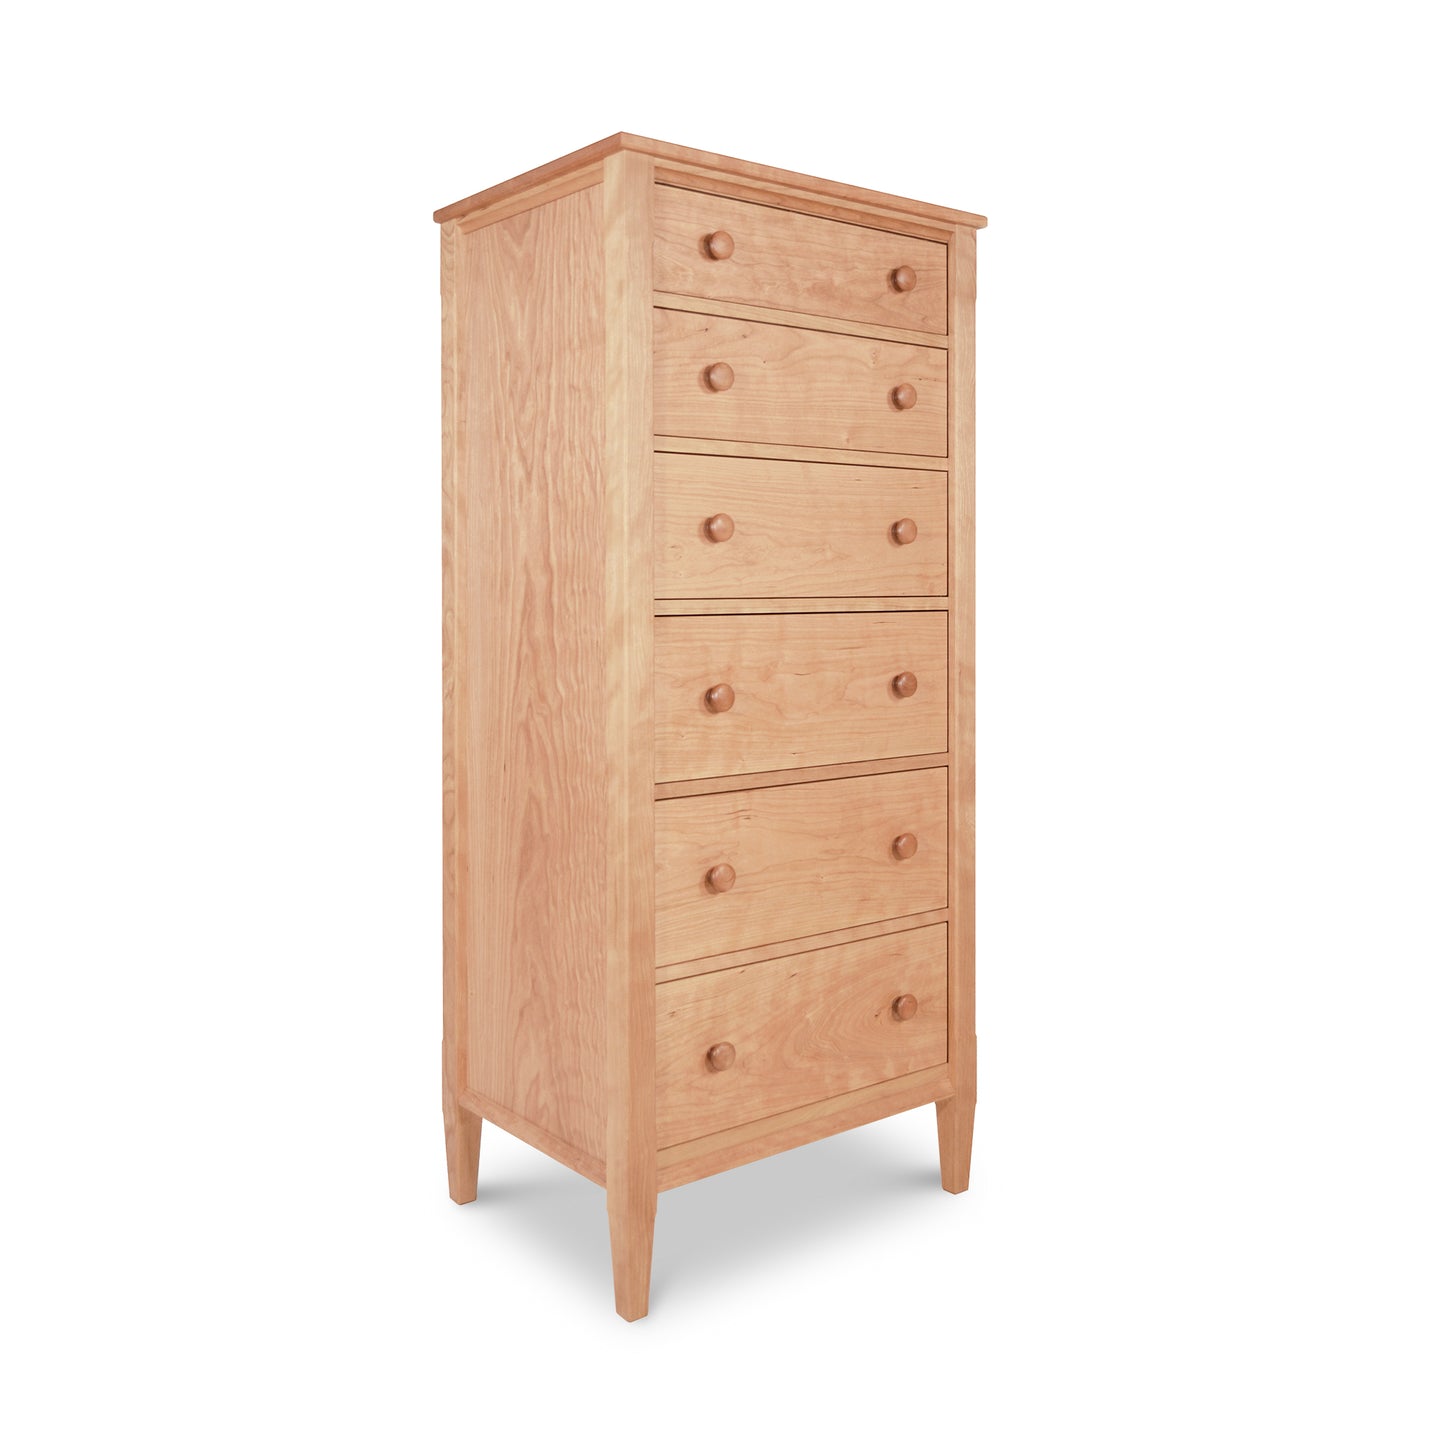 Alt text: Handcrafted Vermont Shaker Lingerie Chest from Maple Corner Woodworks, featuring natural cherry wood finish and shaker-style design. This American-made dresser with six drawers and round wooden knobs showcases durable solid wood construction with tapered legs and a rectangular top, perfect for those seeking high-quality Vermont furniture.